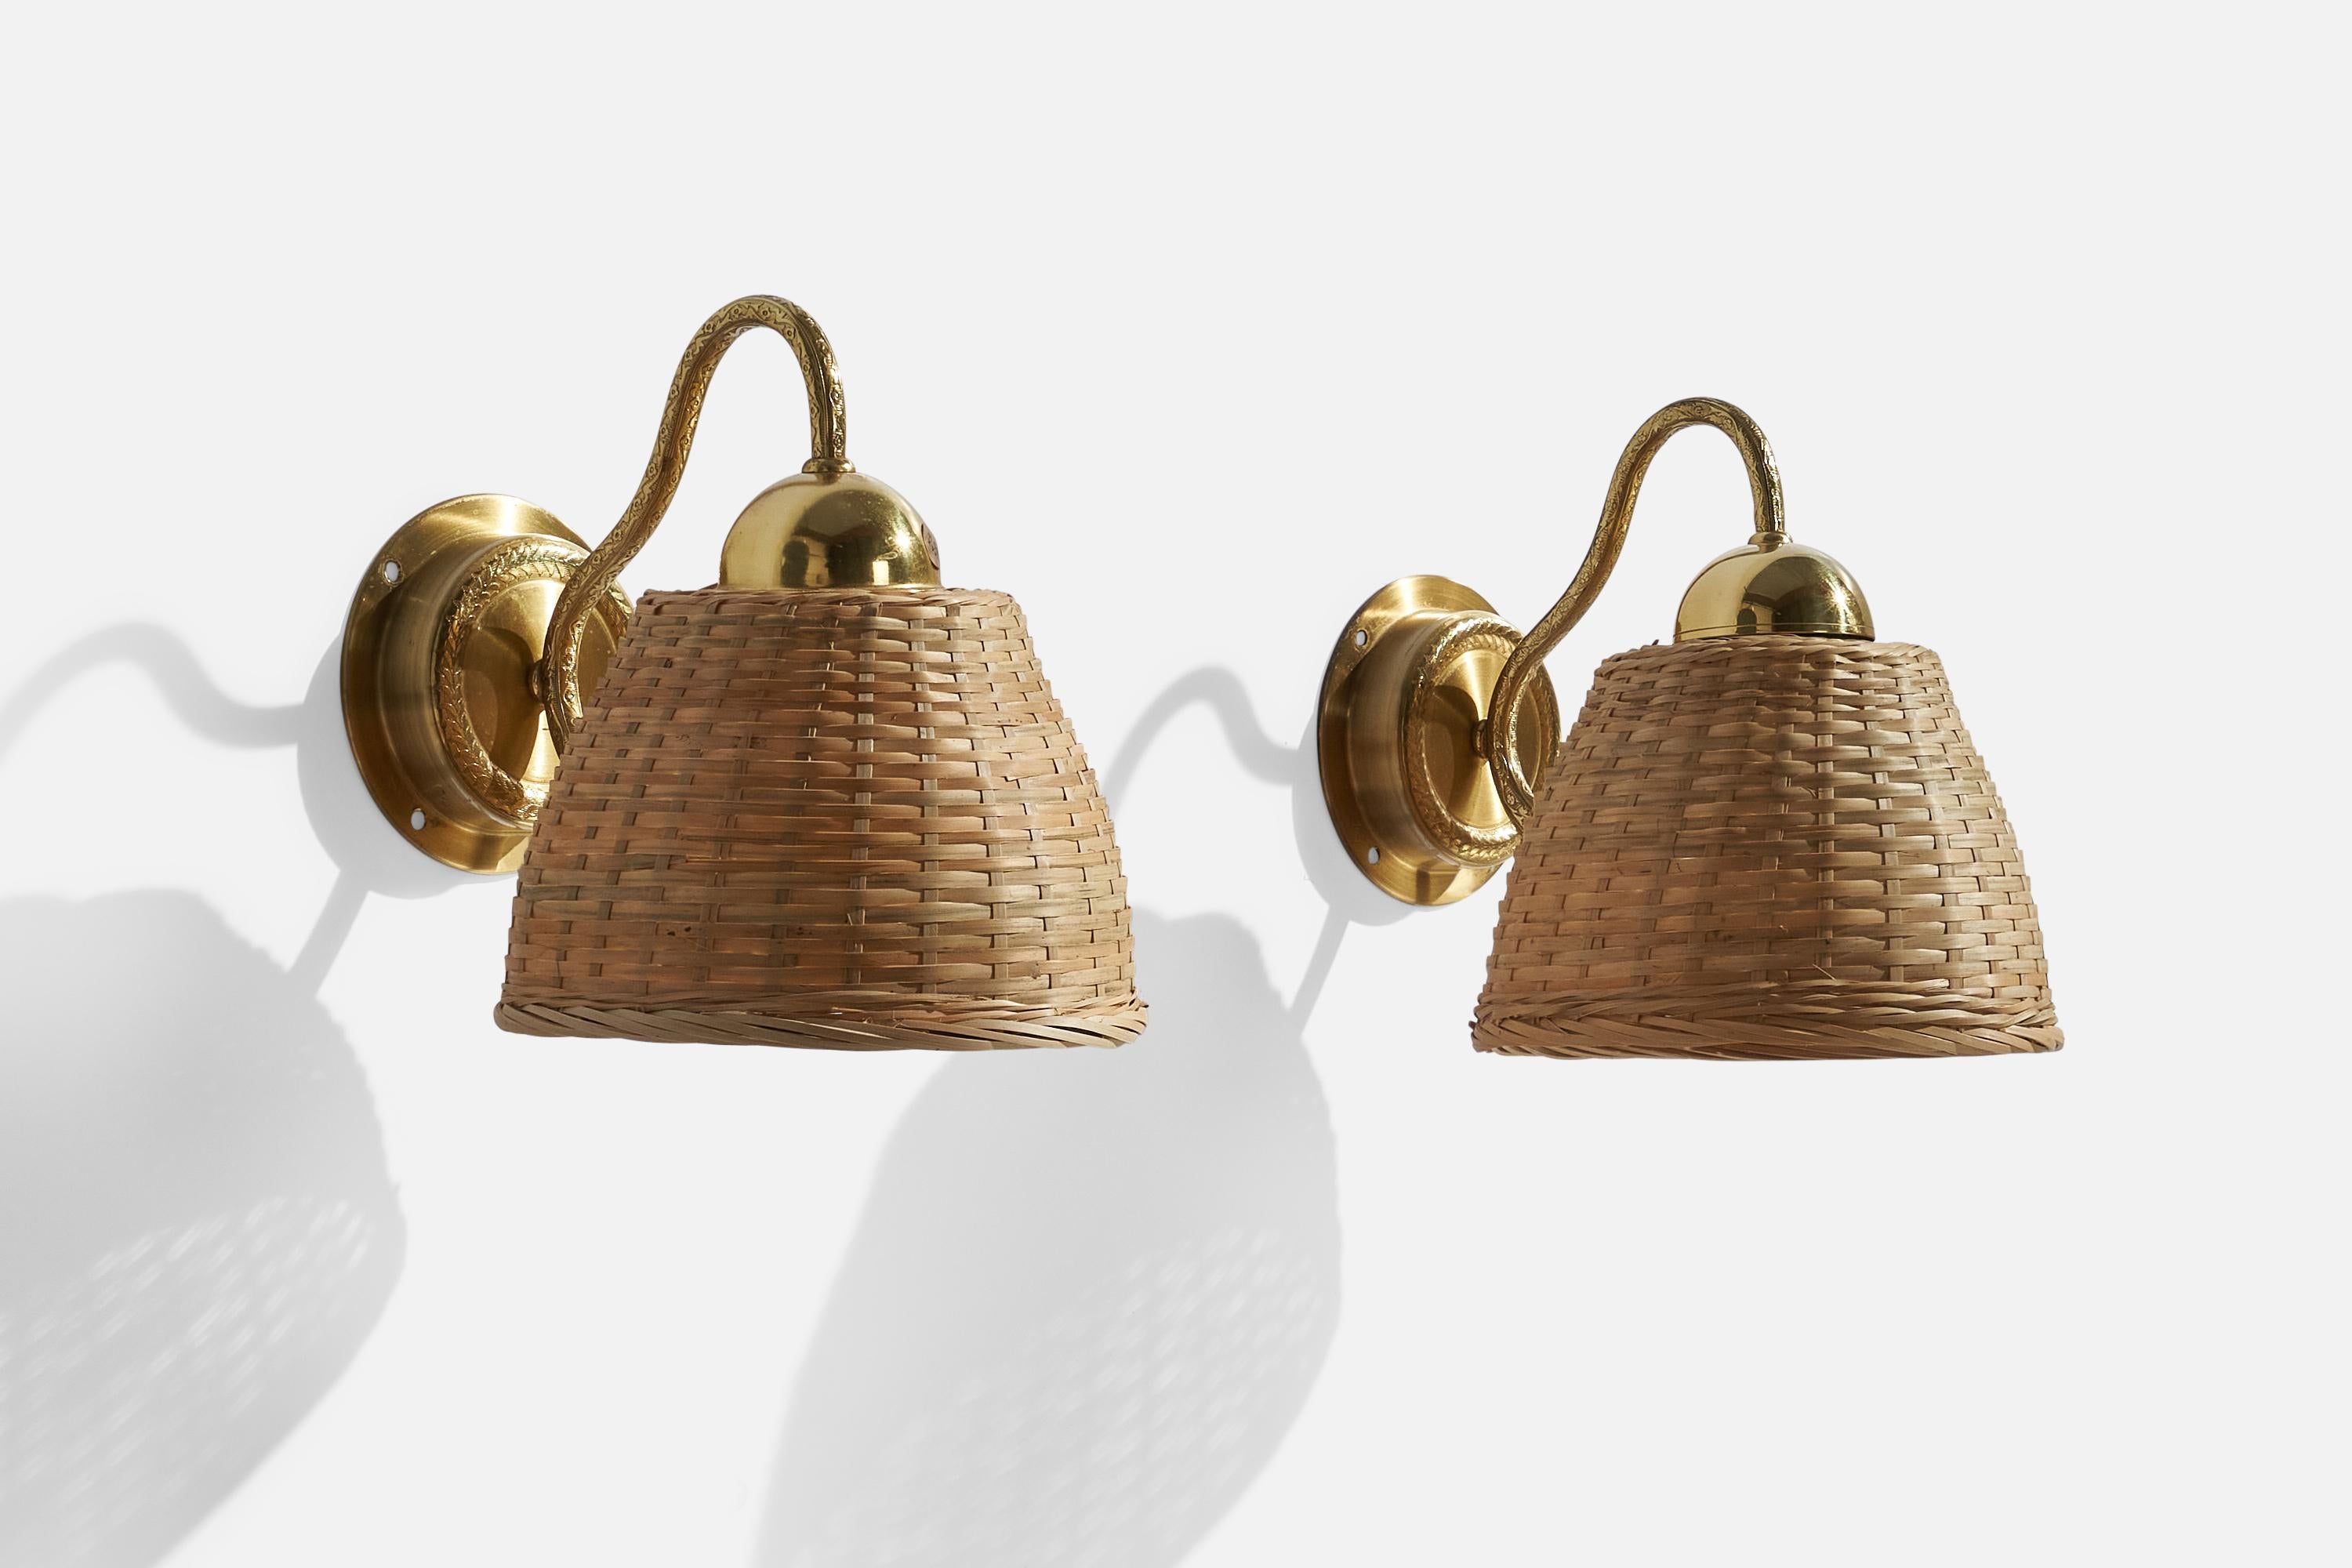 A pair of brass and rattan wall lights, designed and produced by EWÅ Värnamo, Sweden, c. 1970s.

Overall Dimensions (inches): 8.5”  H x 7” W x 9.5”  D
Back Plate Dimensions (inches): 4.25” H x 4.25”  W x 1.0” D
Bulb Specifications: E-26 Bulb
Number